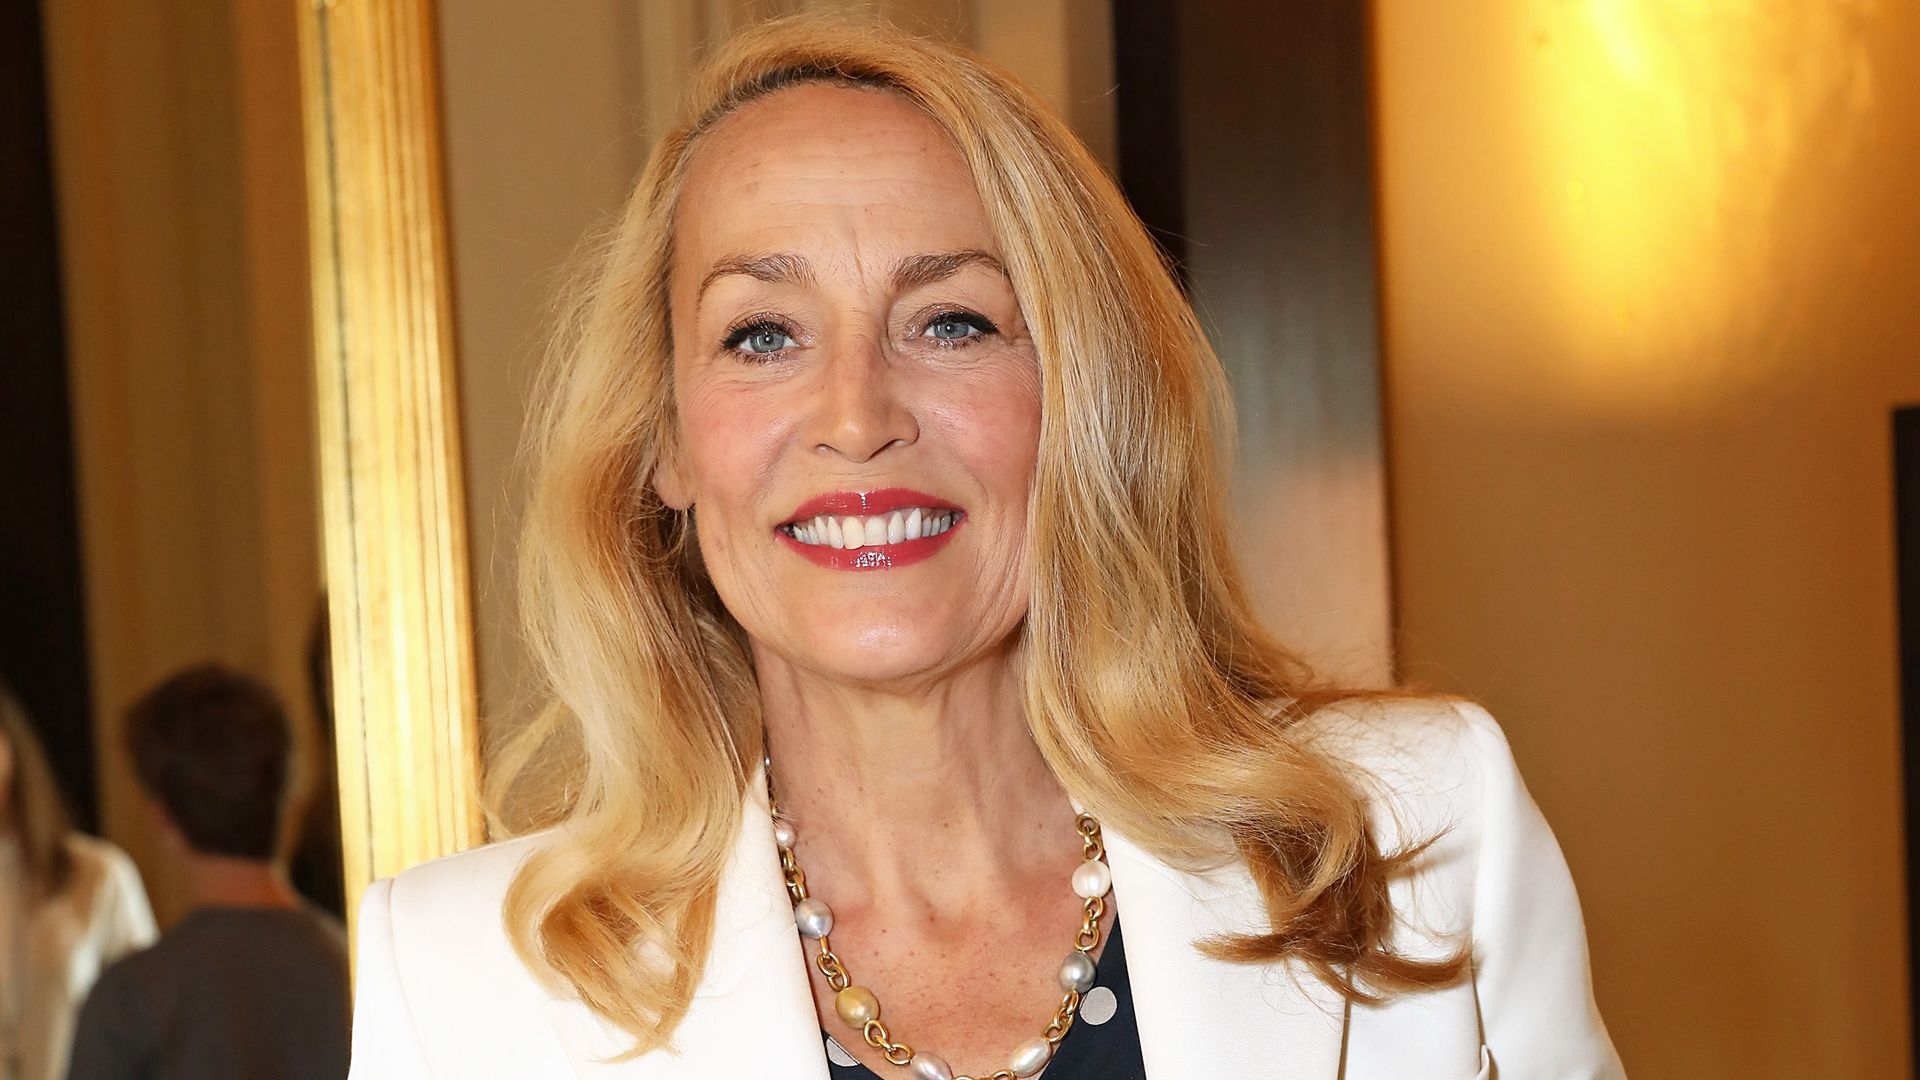 Jerry Hall smiling for the camera in a full length photo